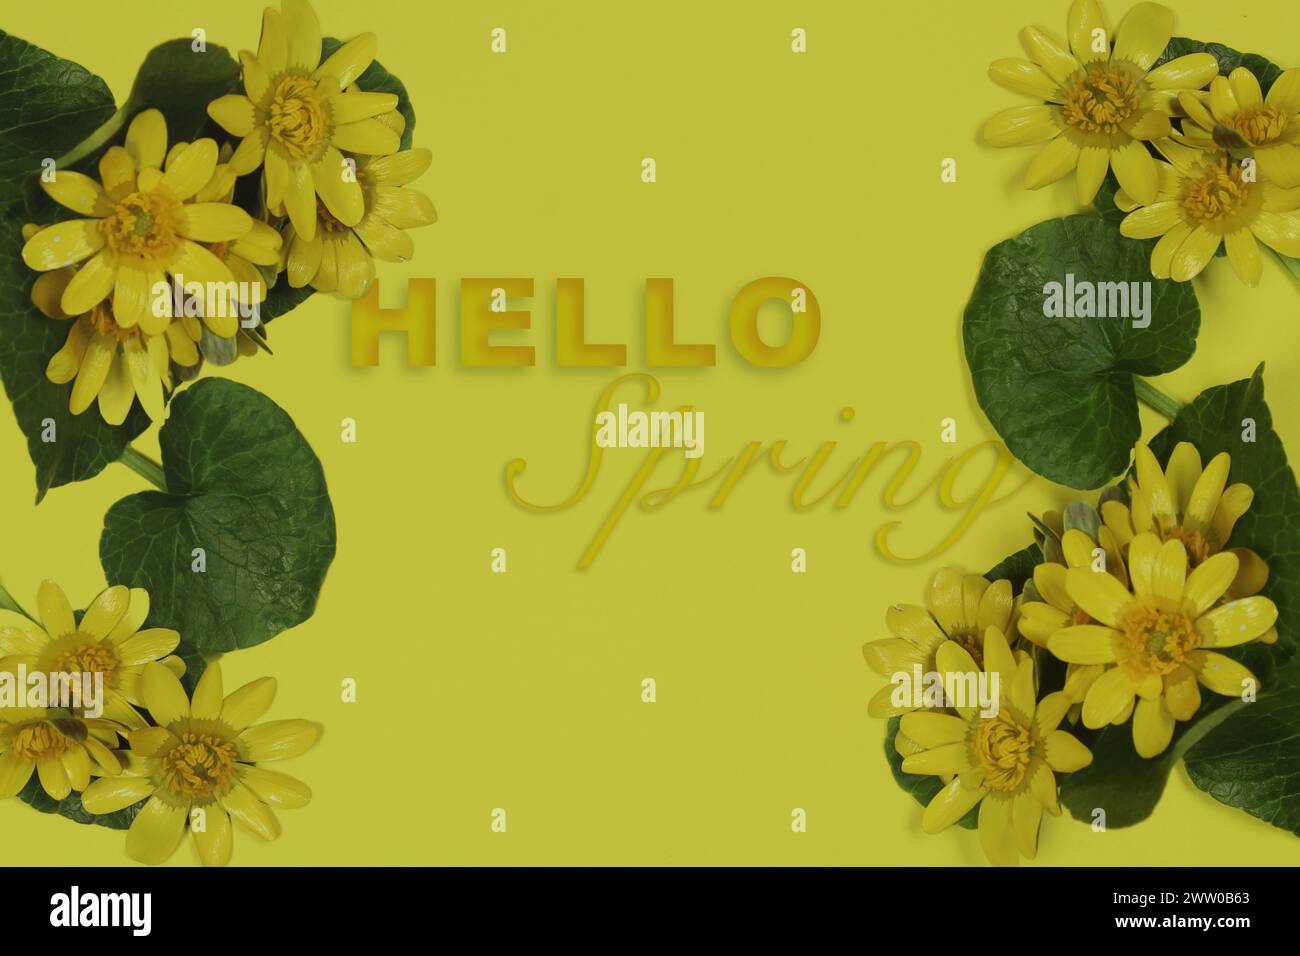 Spring concept idea. Blossom lesser celandine (Ranunculus ficaria) flowers and text 'Hello Spring' isolated on yellow background. Top view. Stock Photo